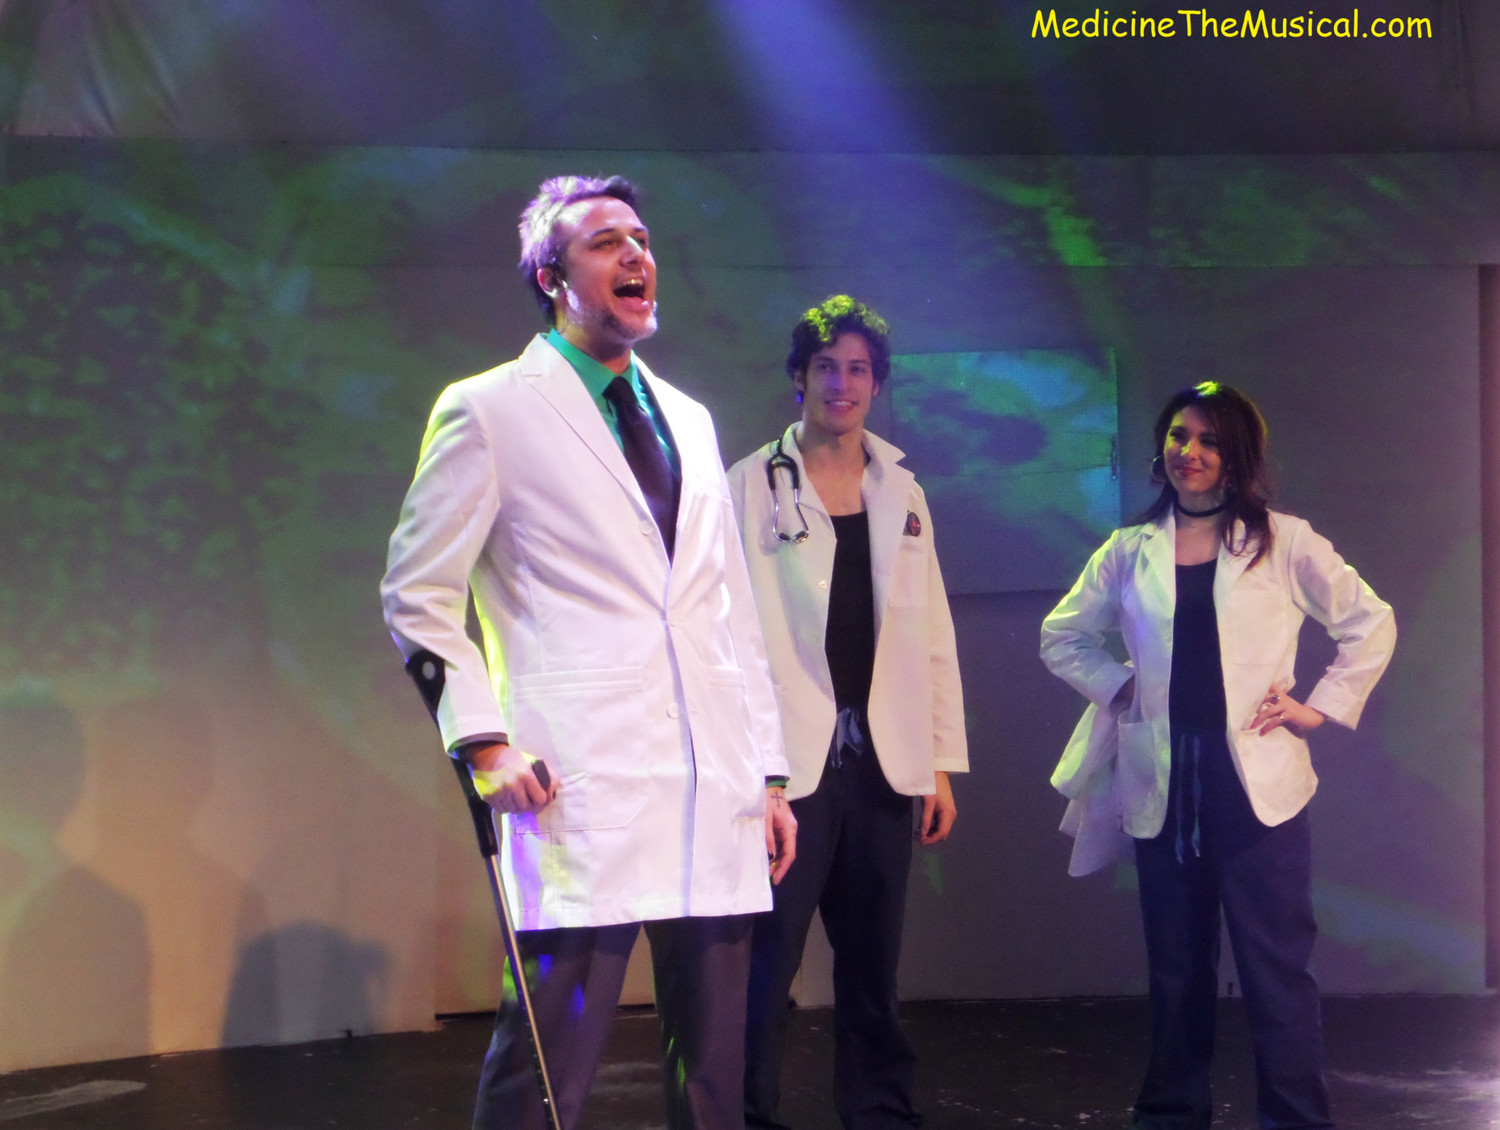 Review: MEDICINE THE MUSICAL at HERE Arts Center 